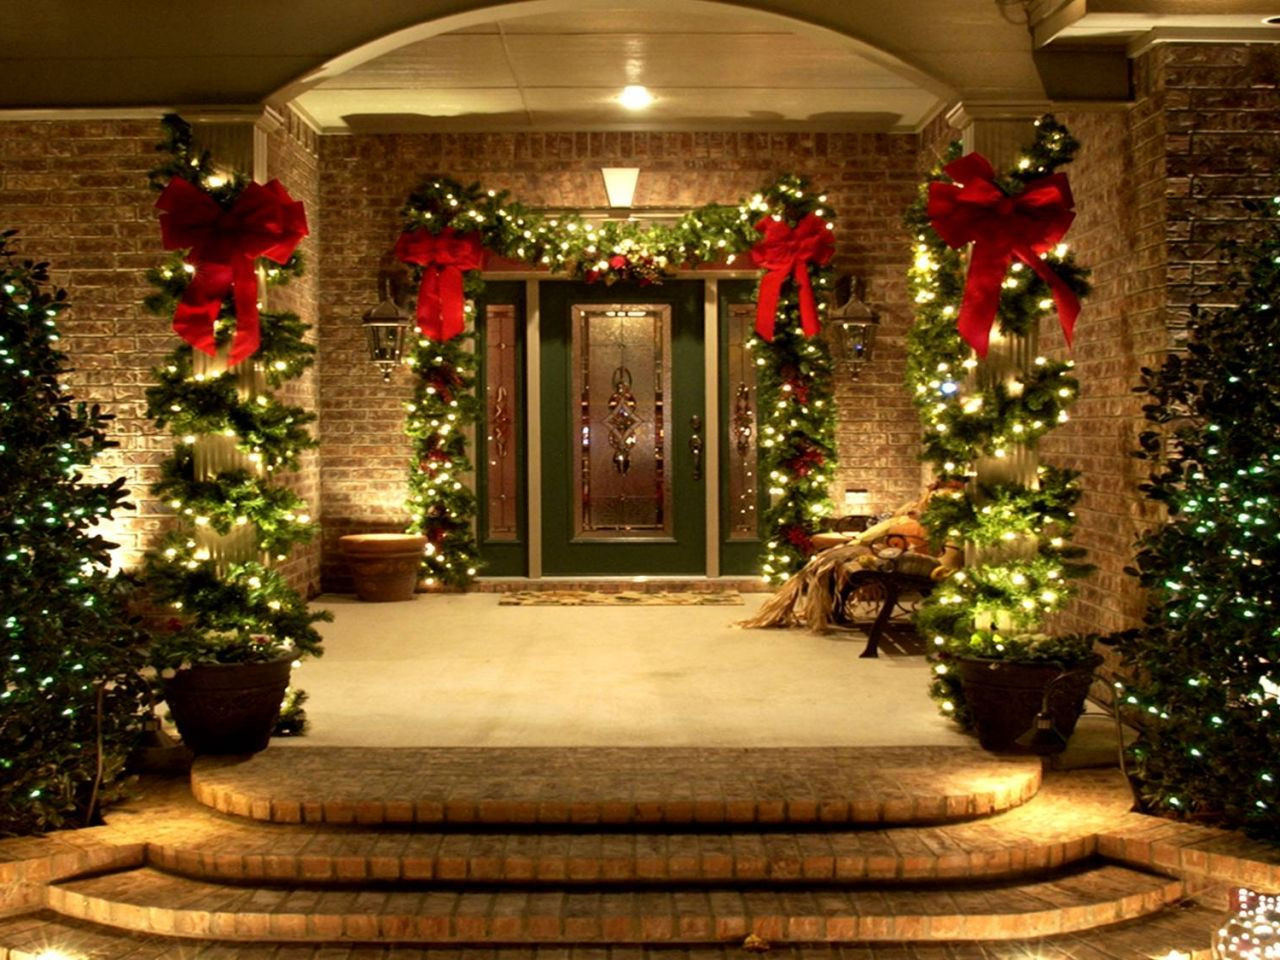 Outdoor Hanging Christmas Decorations
 Use of lighting and decorative plants to the outdoor for